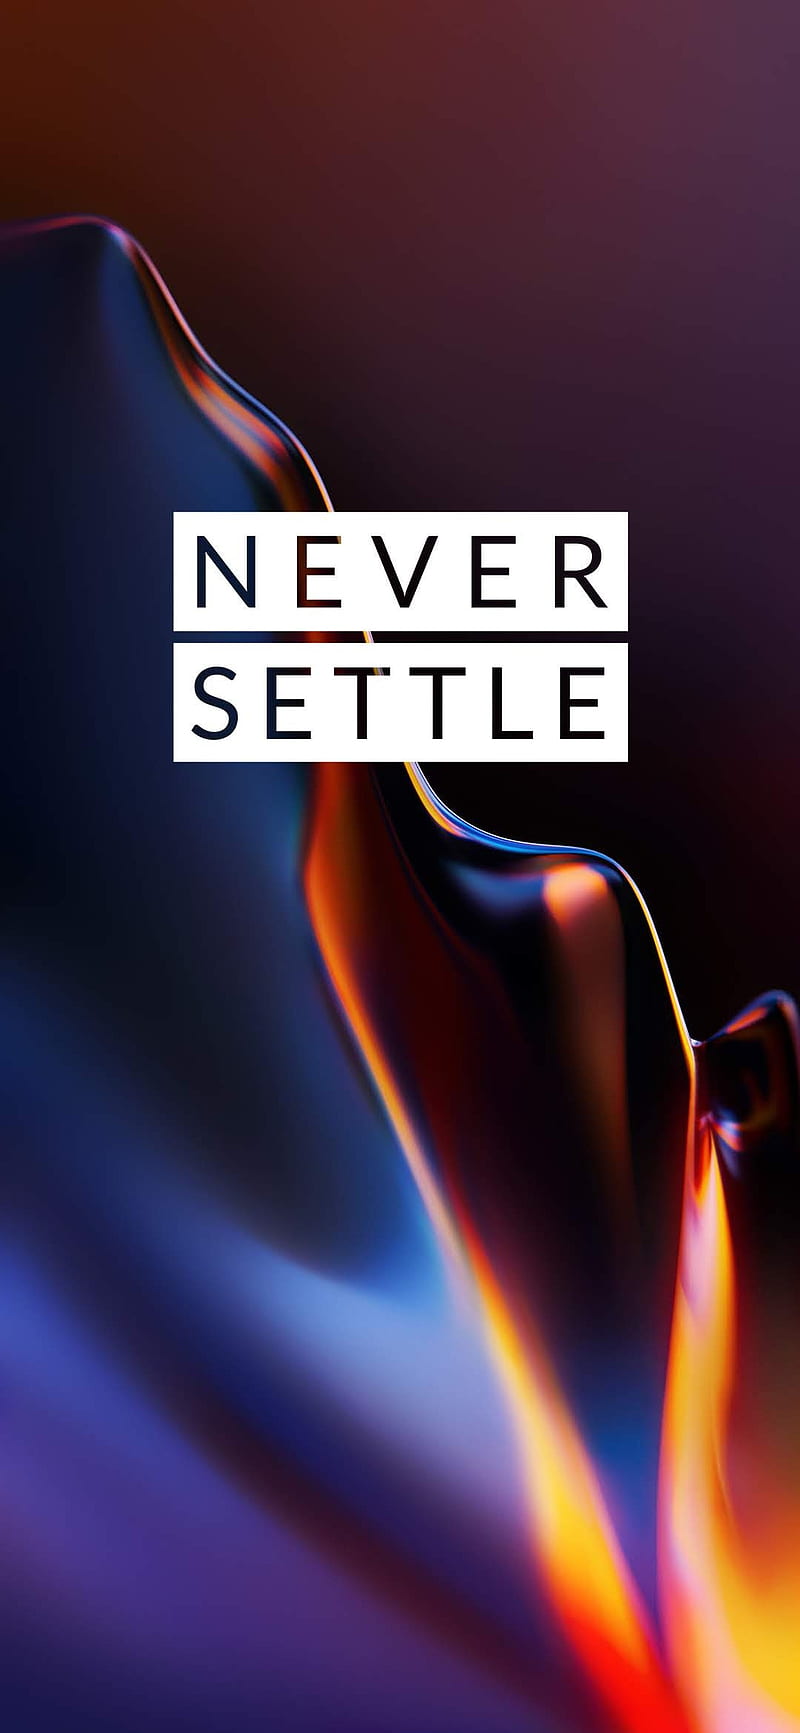 OnePlus 7 Pro Wallpaper YTECHB Exclusive  Oneplus wallpapers Attractive  wallpapers Never settle wallpapers